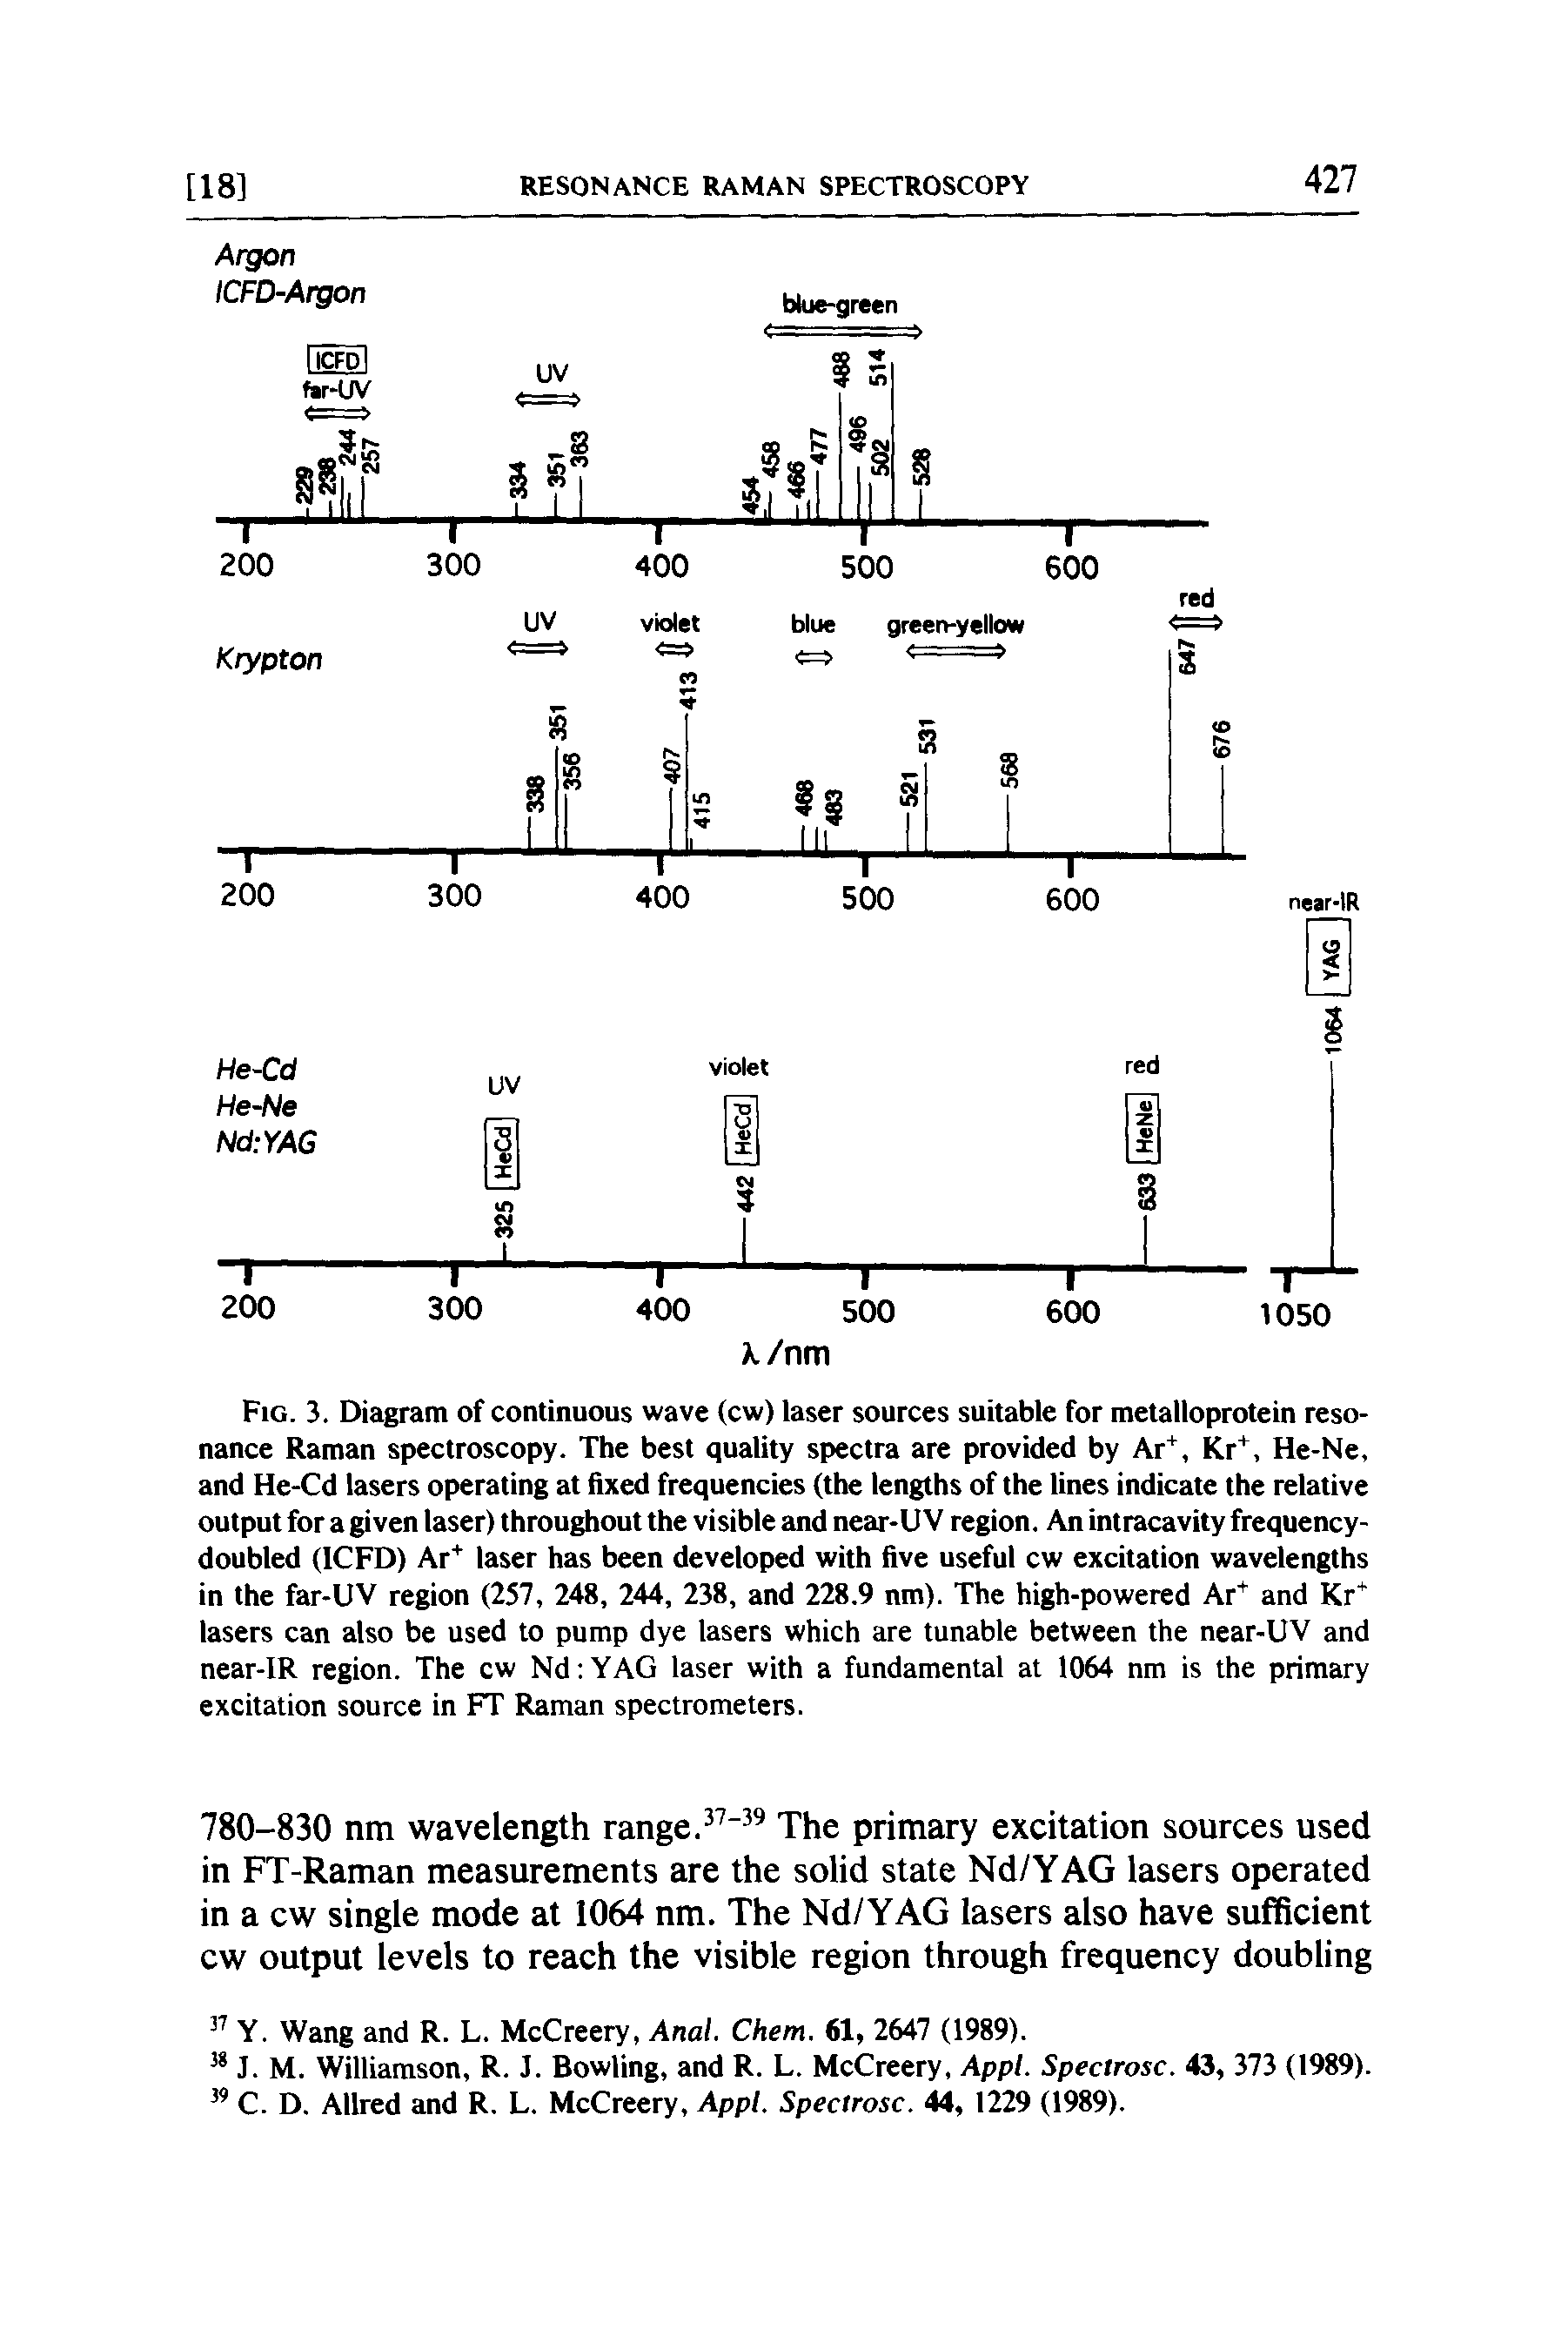 Fig. 3. Diagram of continuous wave (cw) laser sources suitable for metalloprotein resonance Raman spectroscopy. The best quality spectra are provided by Ar, Kr, He-Ne, and He-Cd lasers operating at fixed frequencies (the lengths of the lines indicate the relative output for a given laser) throughout the visible and near-UV region. An intracavity frequency-doubled (ICFD) Ar laser has been developed with five useful cw excitation wavelengths in the far-UV region (257, 248, 244, 238, and 228.9 nm). The high-powered Ar and Kr lasers can also be used to pump dye lasers which are tunable between the near-UV and near-IR region. The cw Nd YAG laser with a fundamental at 1064 nm is the primary excitation source in FT Raman spectrometers.